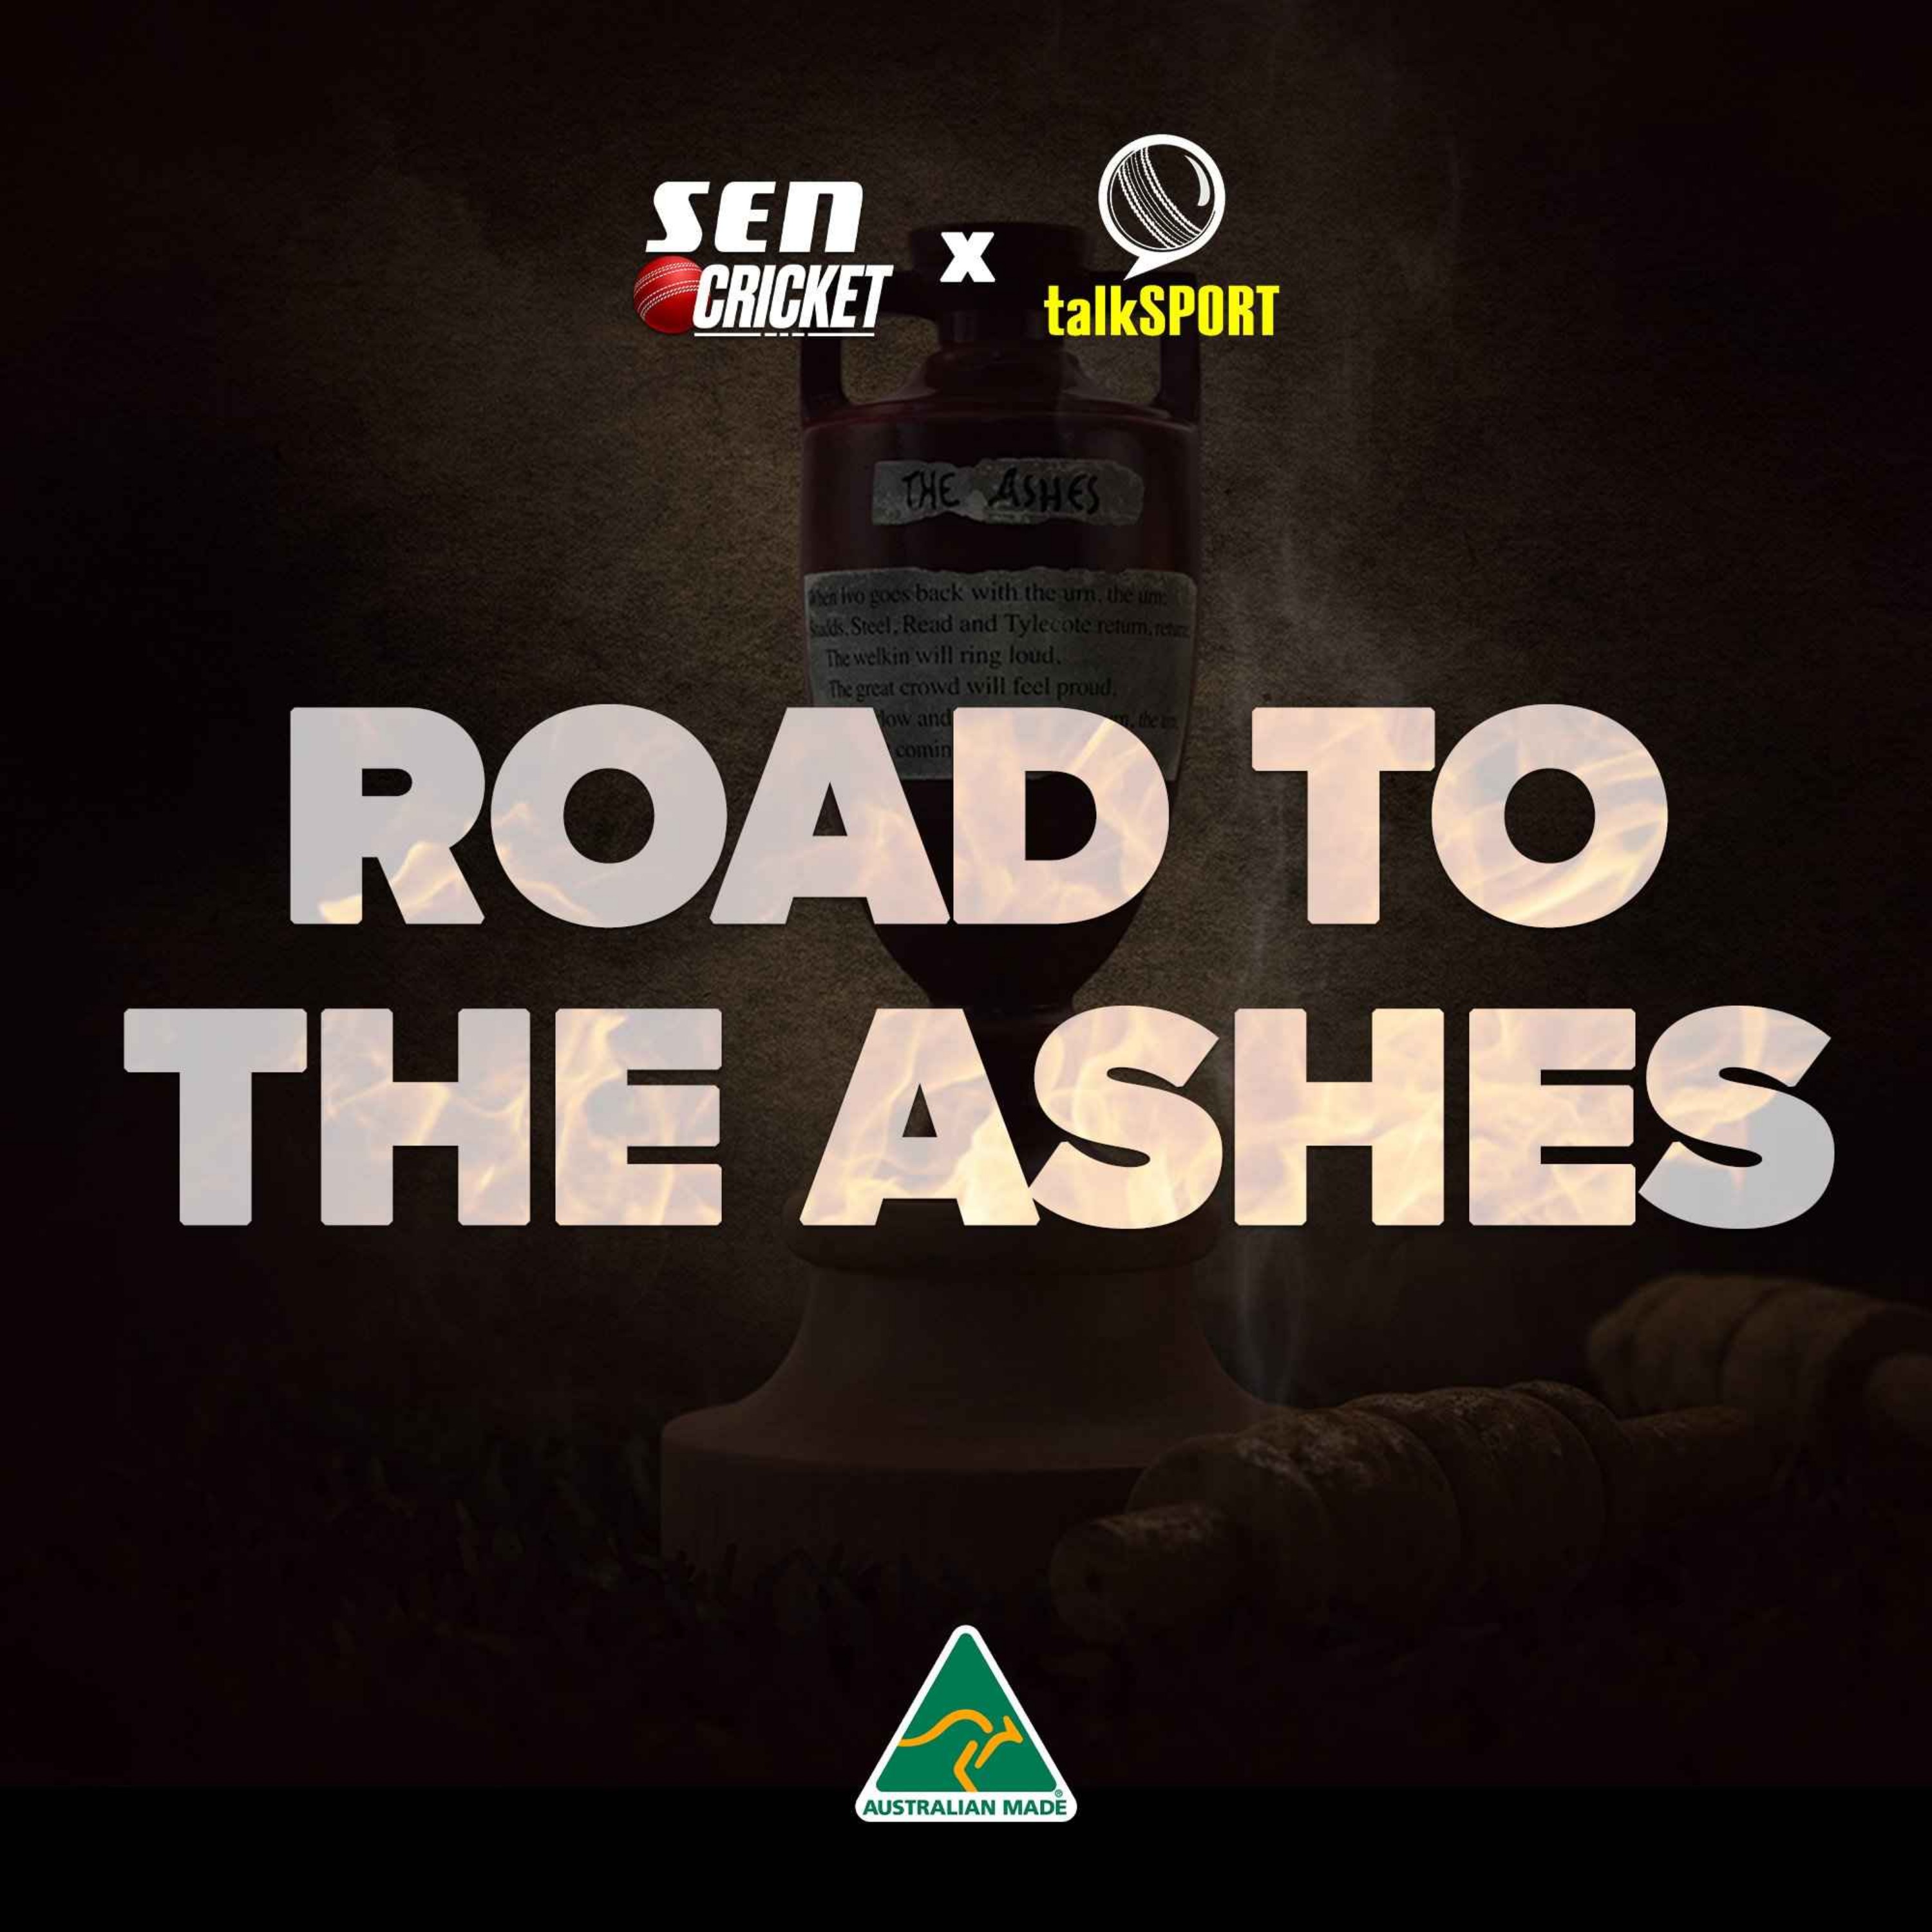 Road To The Ashes EP6: Stuart Broad & Marcus Harris Exclusives & Jason Gillespie's Ashes Memories